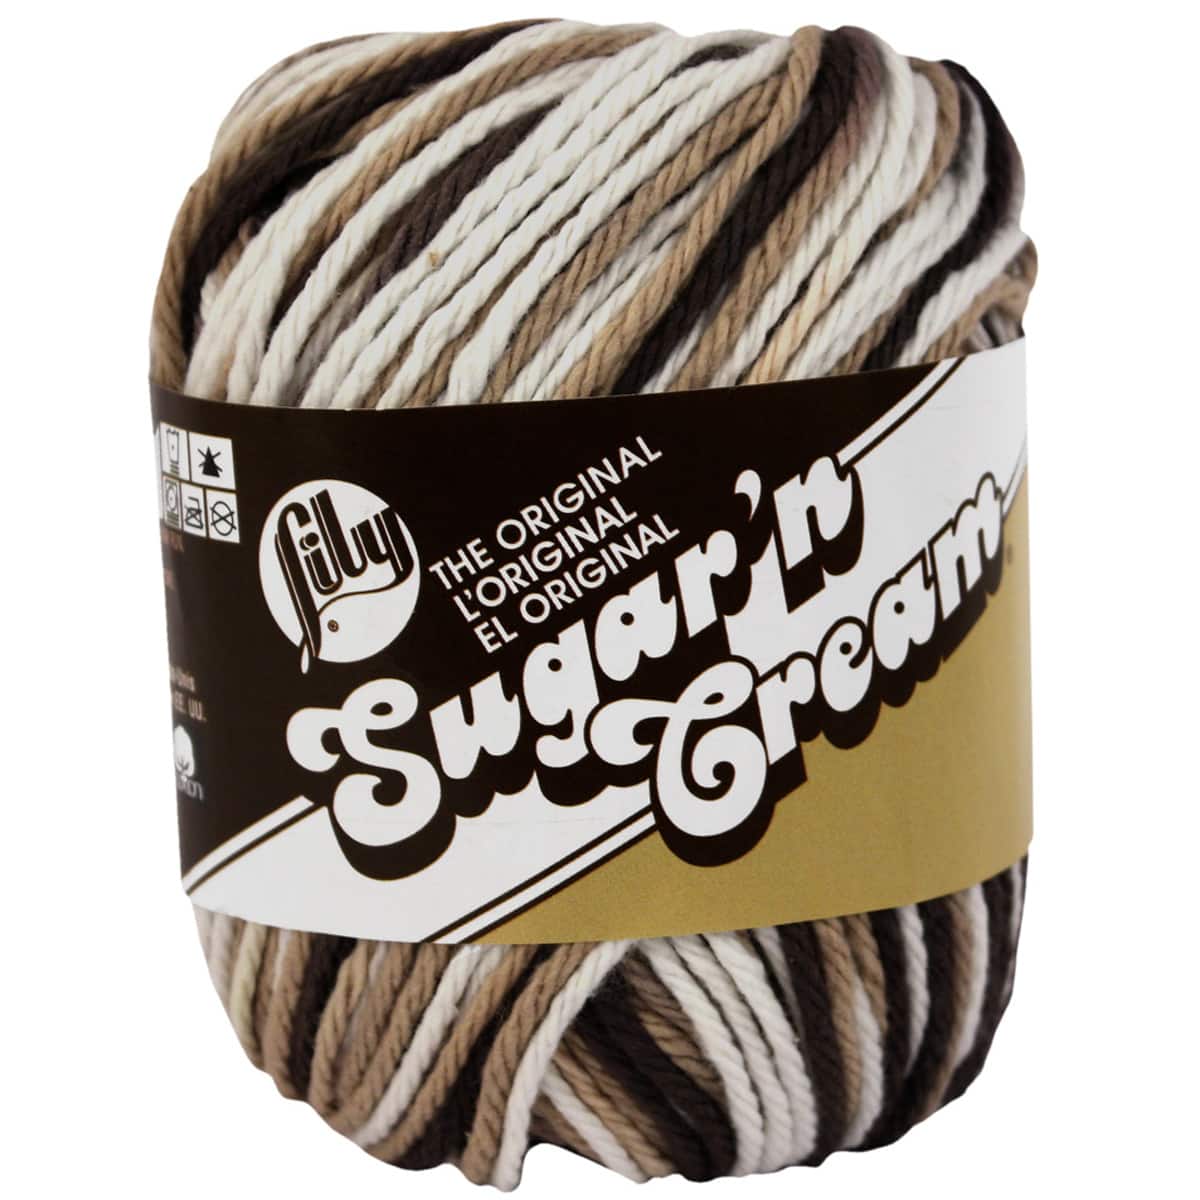 Lily Sugar'n Cream Yarn - Ombres Super Size-Hippi, 1 count - Pick